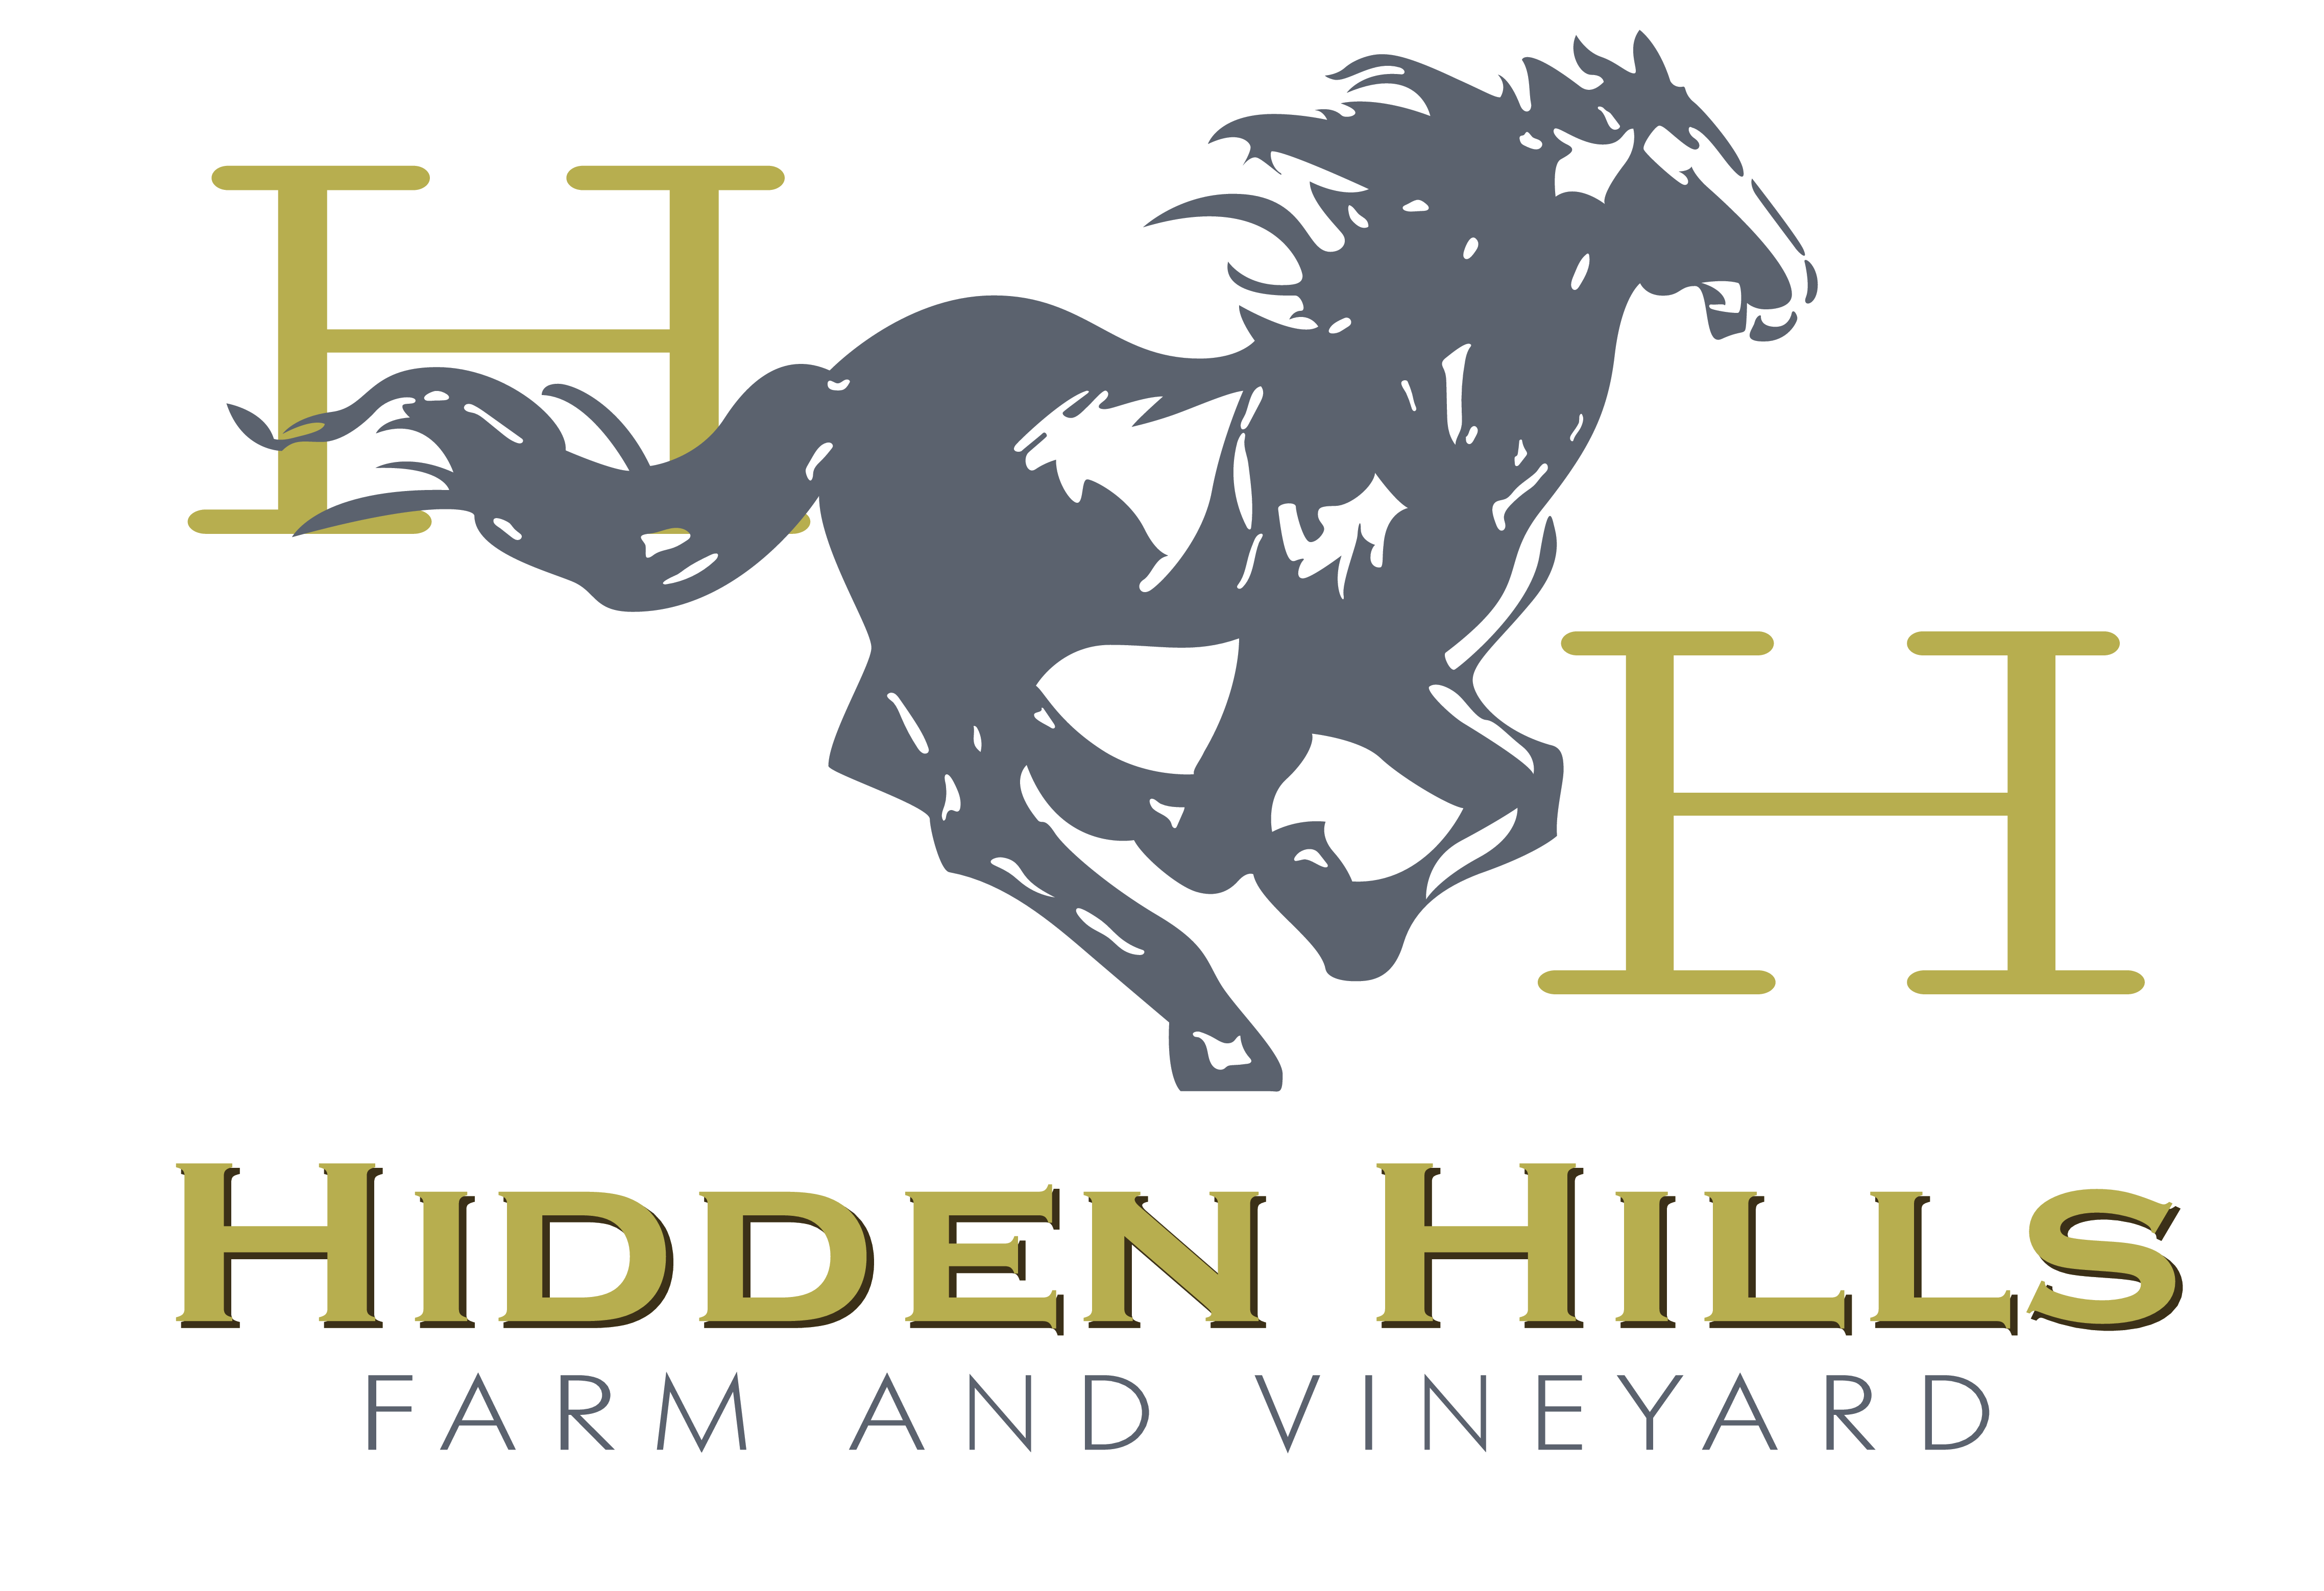 Maryland Boutique Winery – Hidden Hills Farm and Vineyard logo